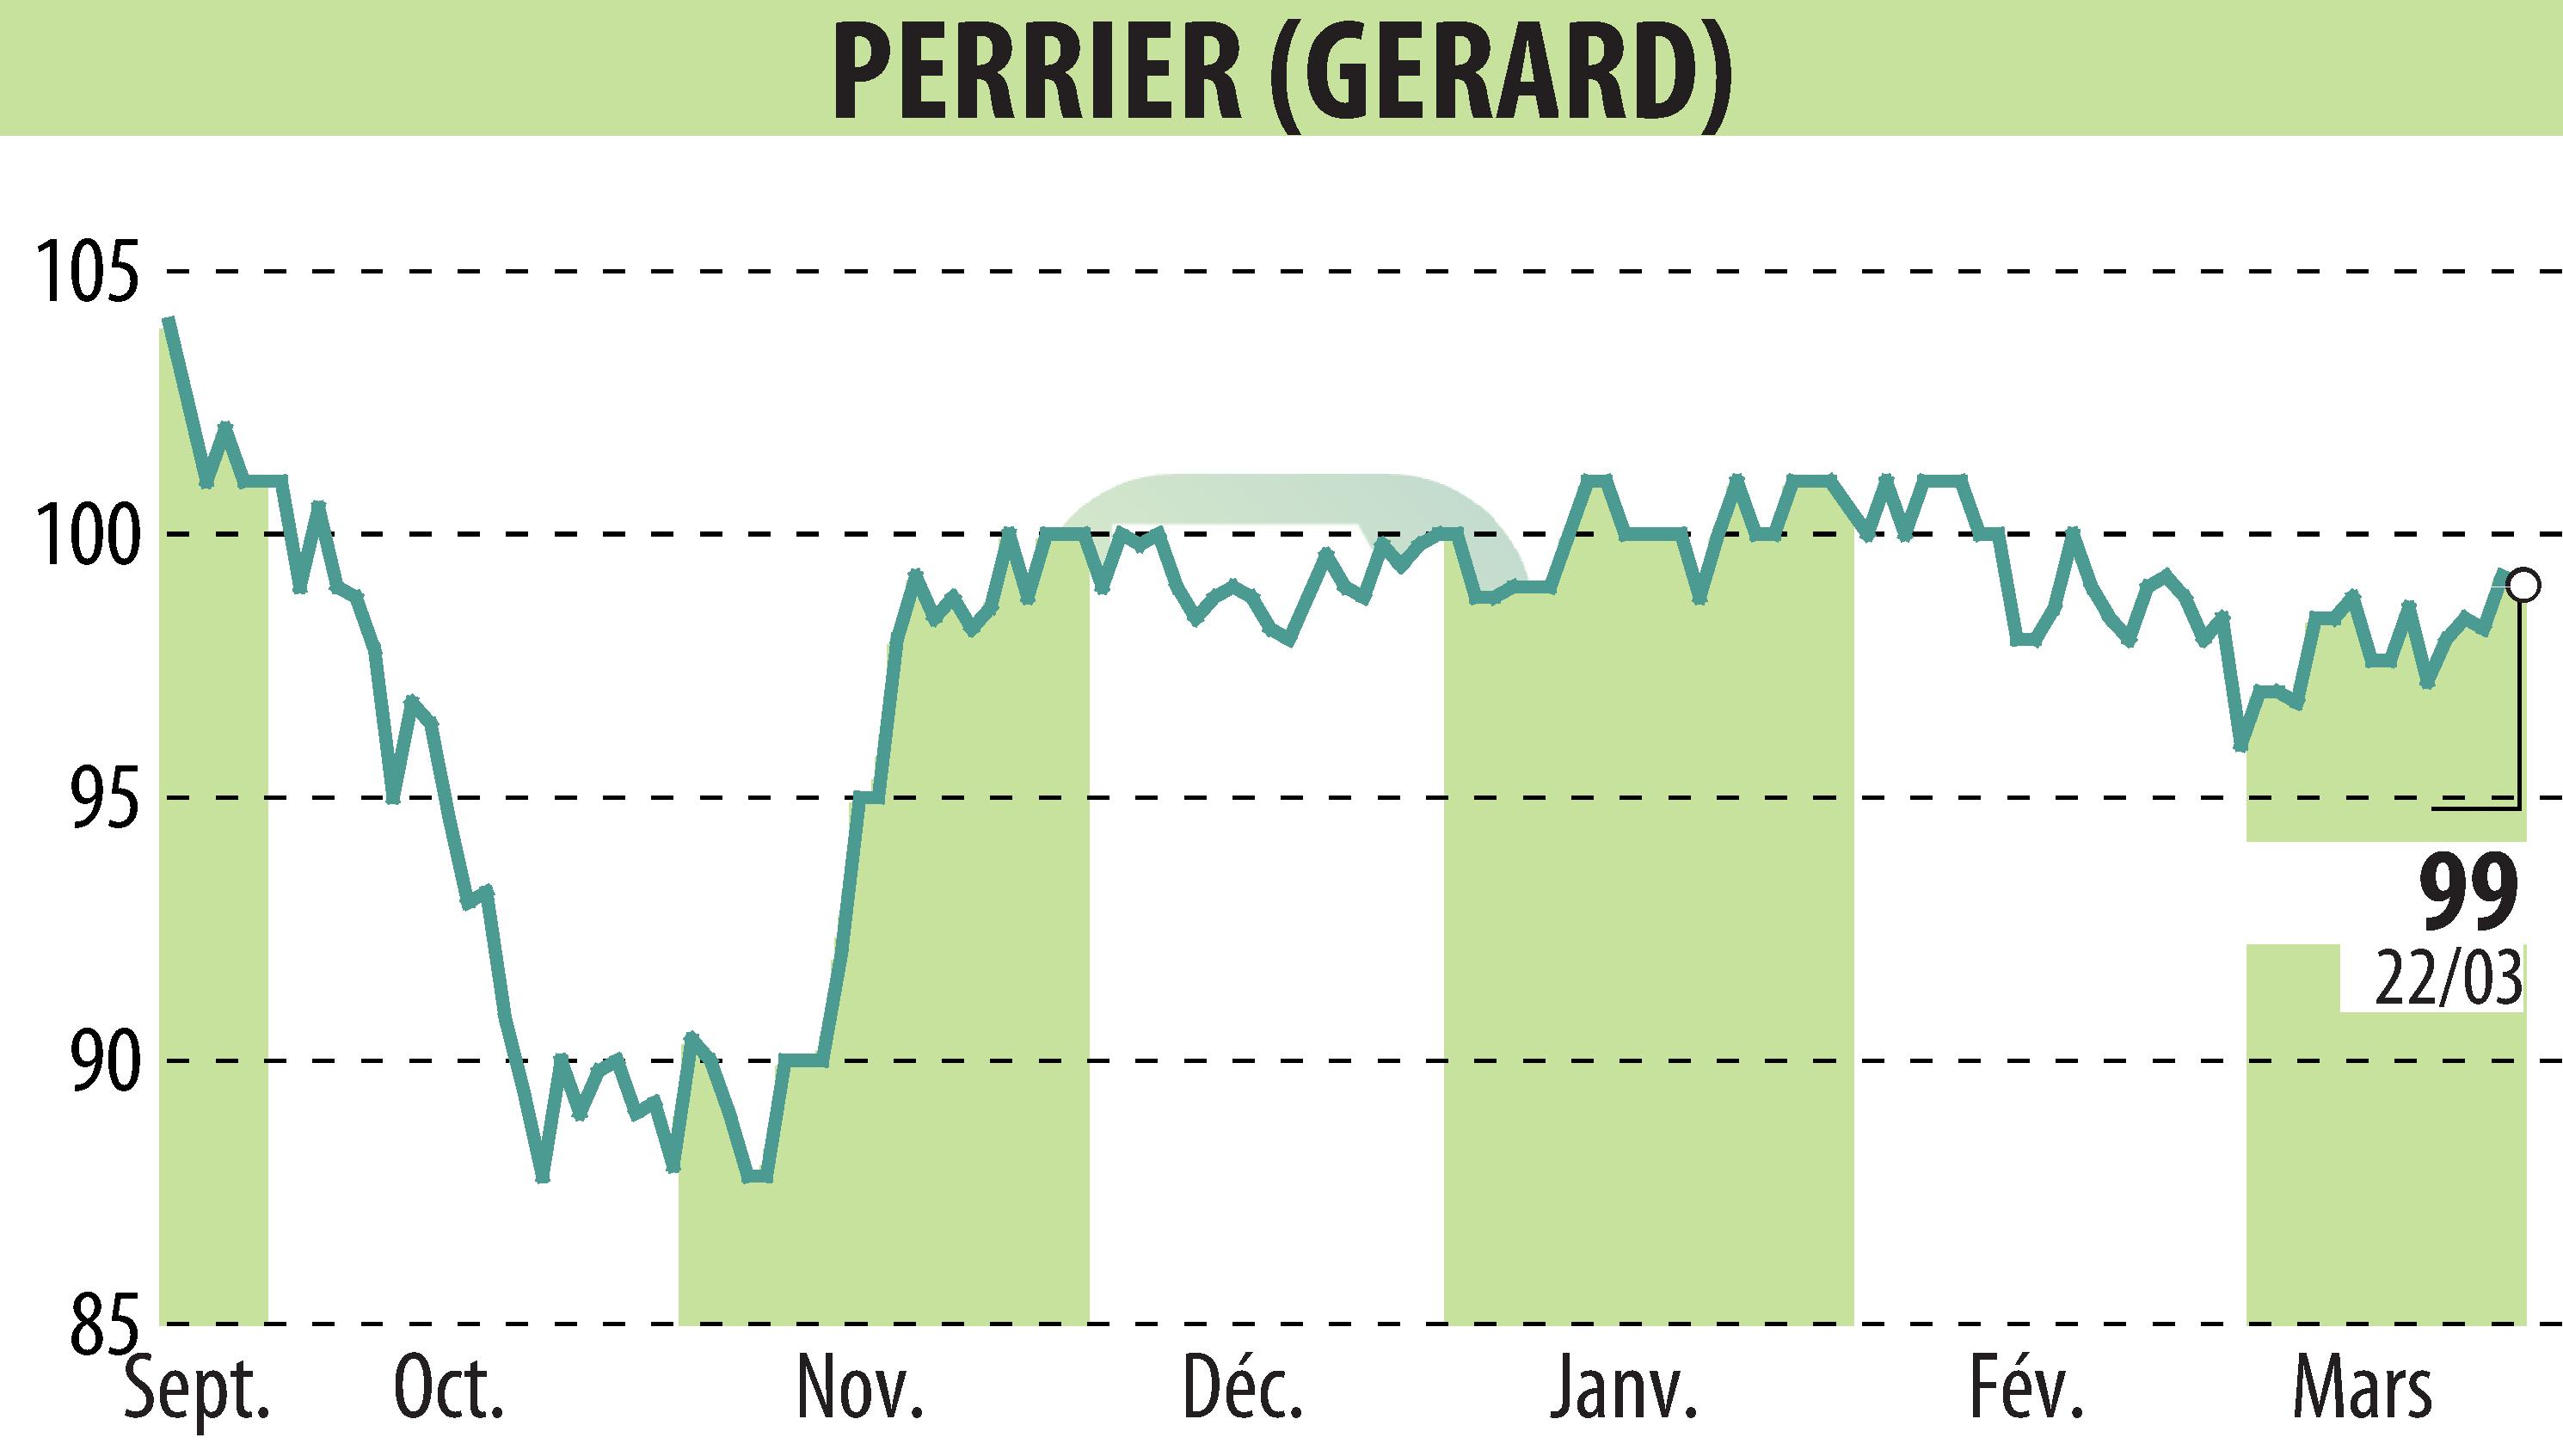 Stock price chart of GERARD PERRIER (EPA:PERR) showing fluctuations.